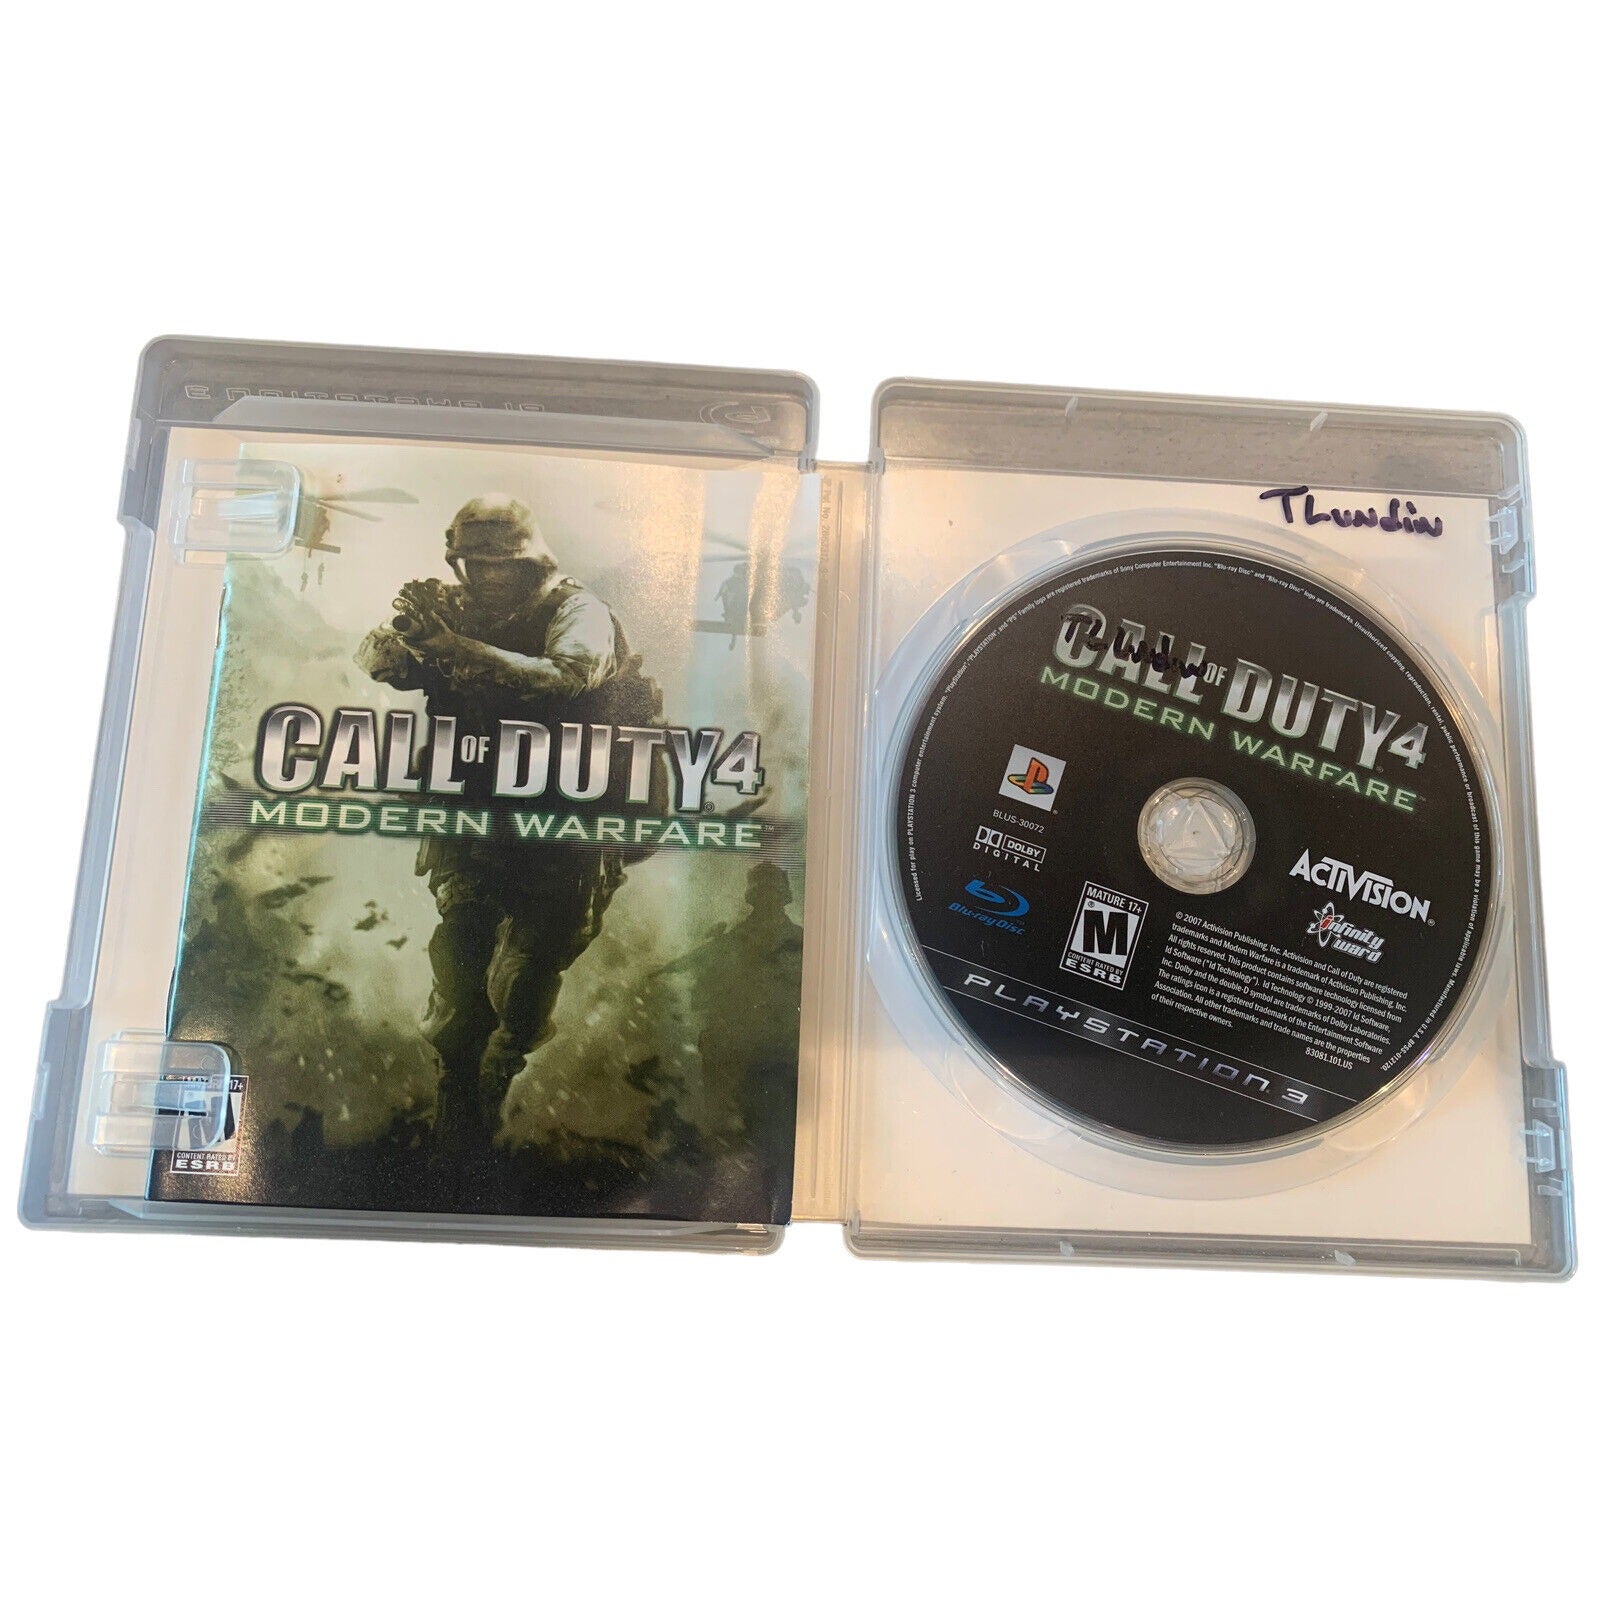 Call of Duty 4 Modern Warfare PlayStation 3 Disc And Sleeve Displayed In Open Case